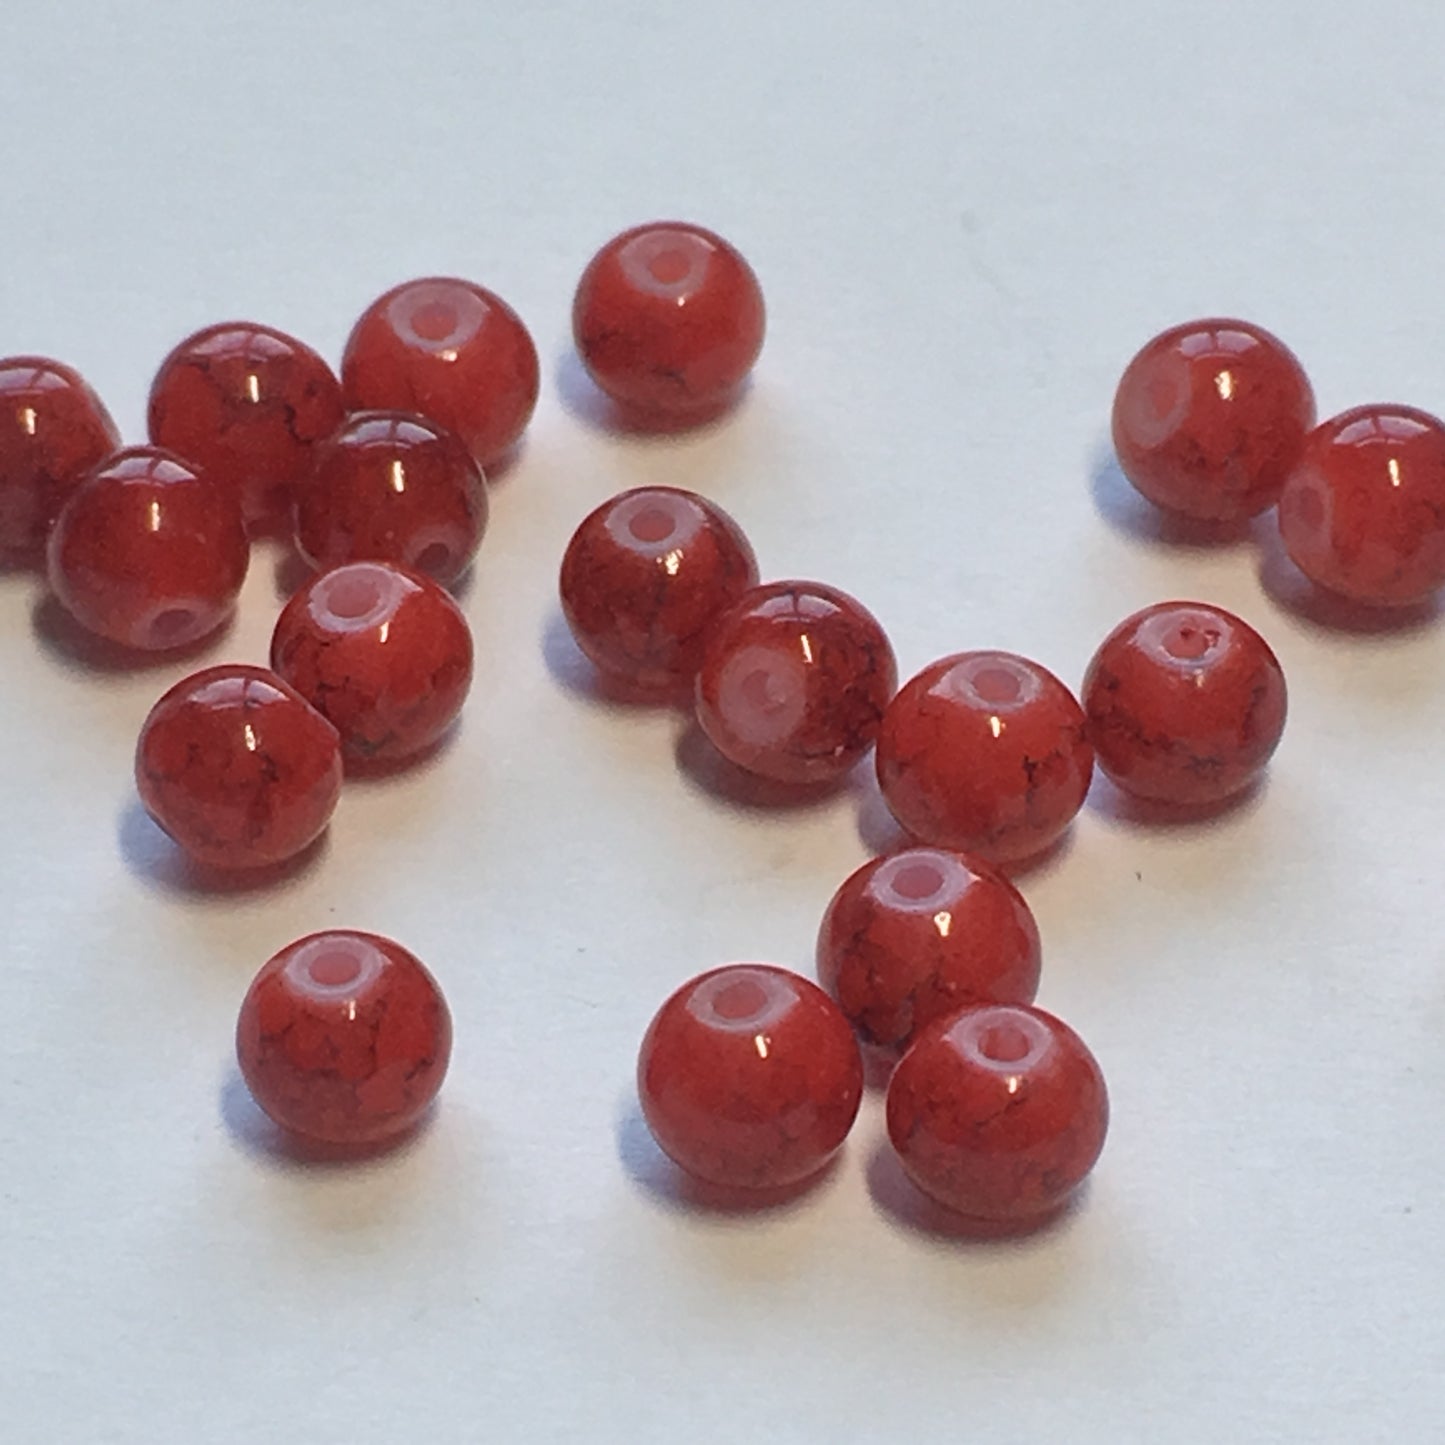 Red Painted Glass Round Beads, 4 mm, 20 Beads